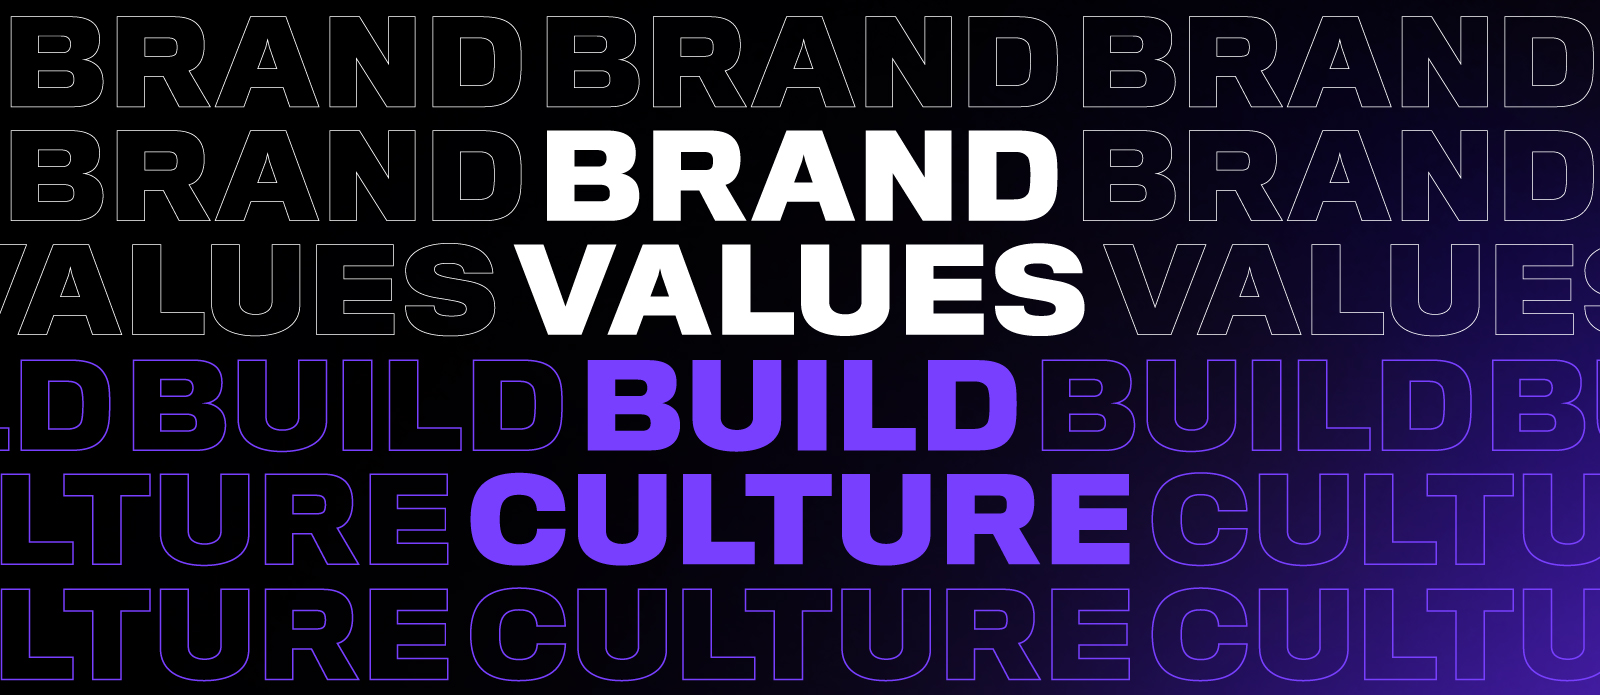 How to Create Values that Build Company Culture - Free Online Branding Course